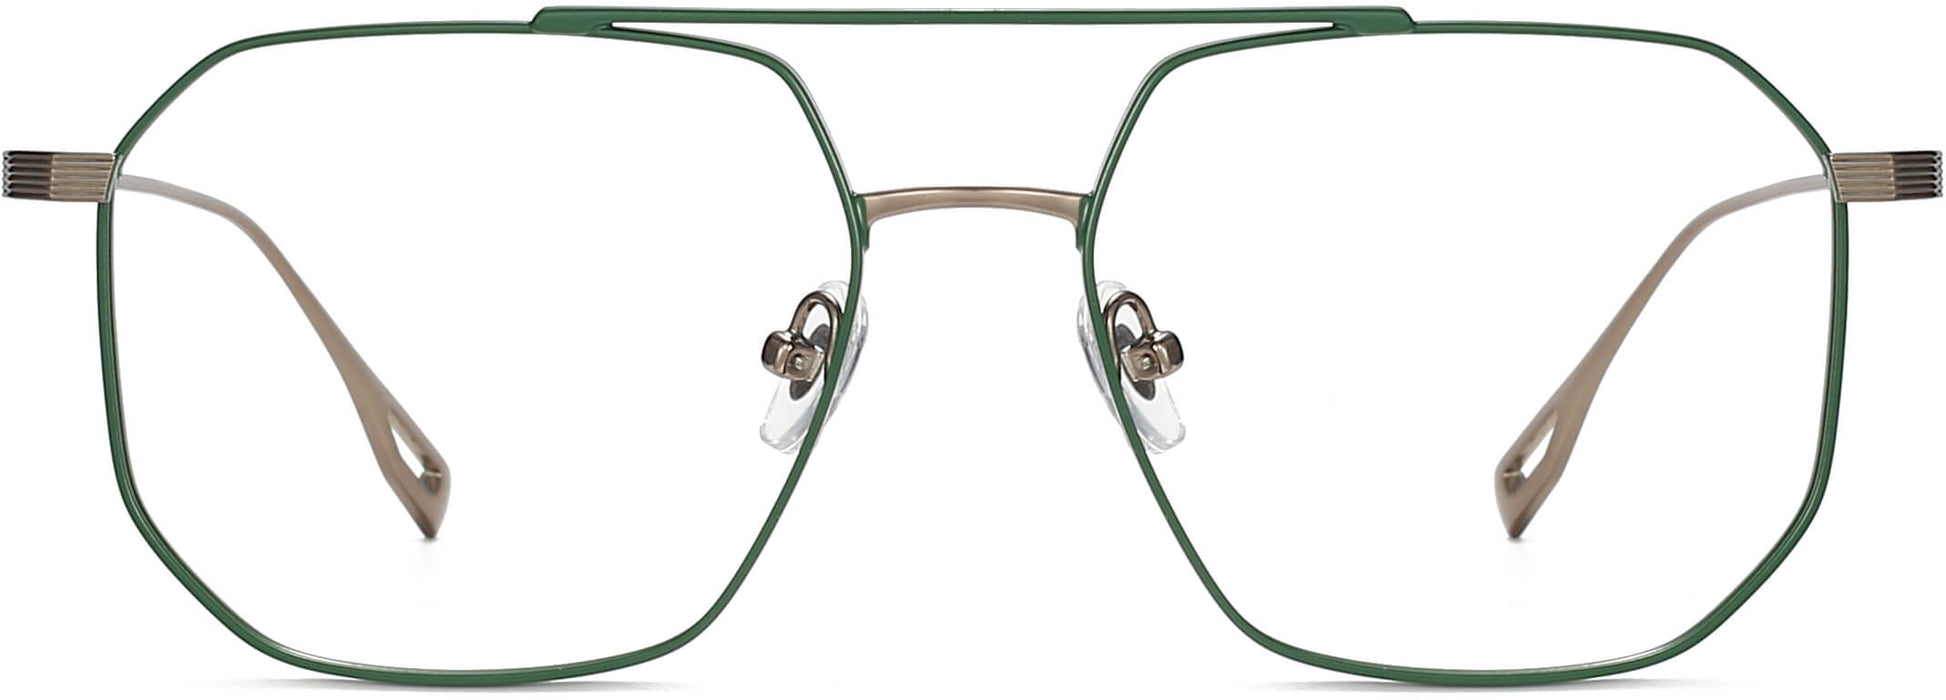 Cayson Geometric Green Eyeglasses from ANRRI, front view